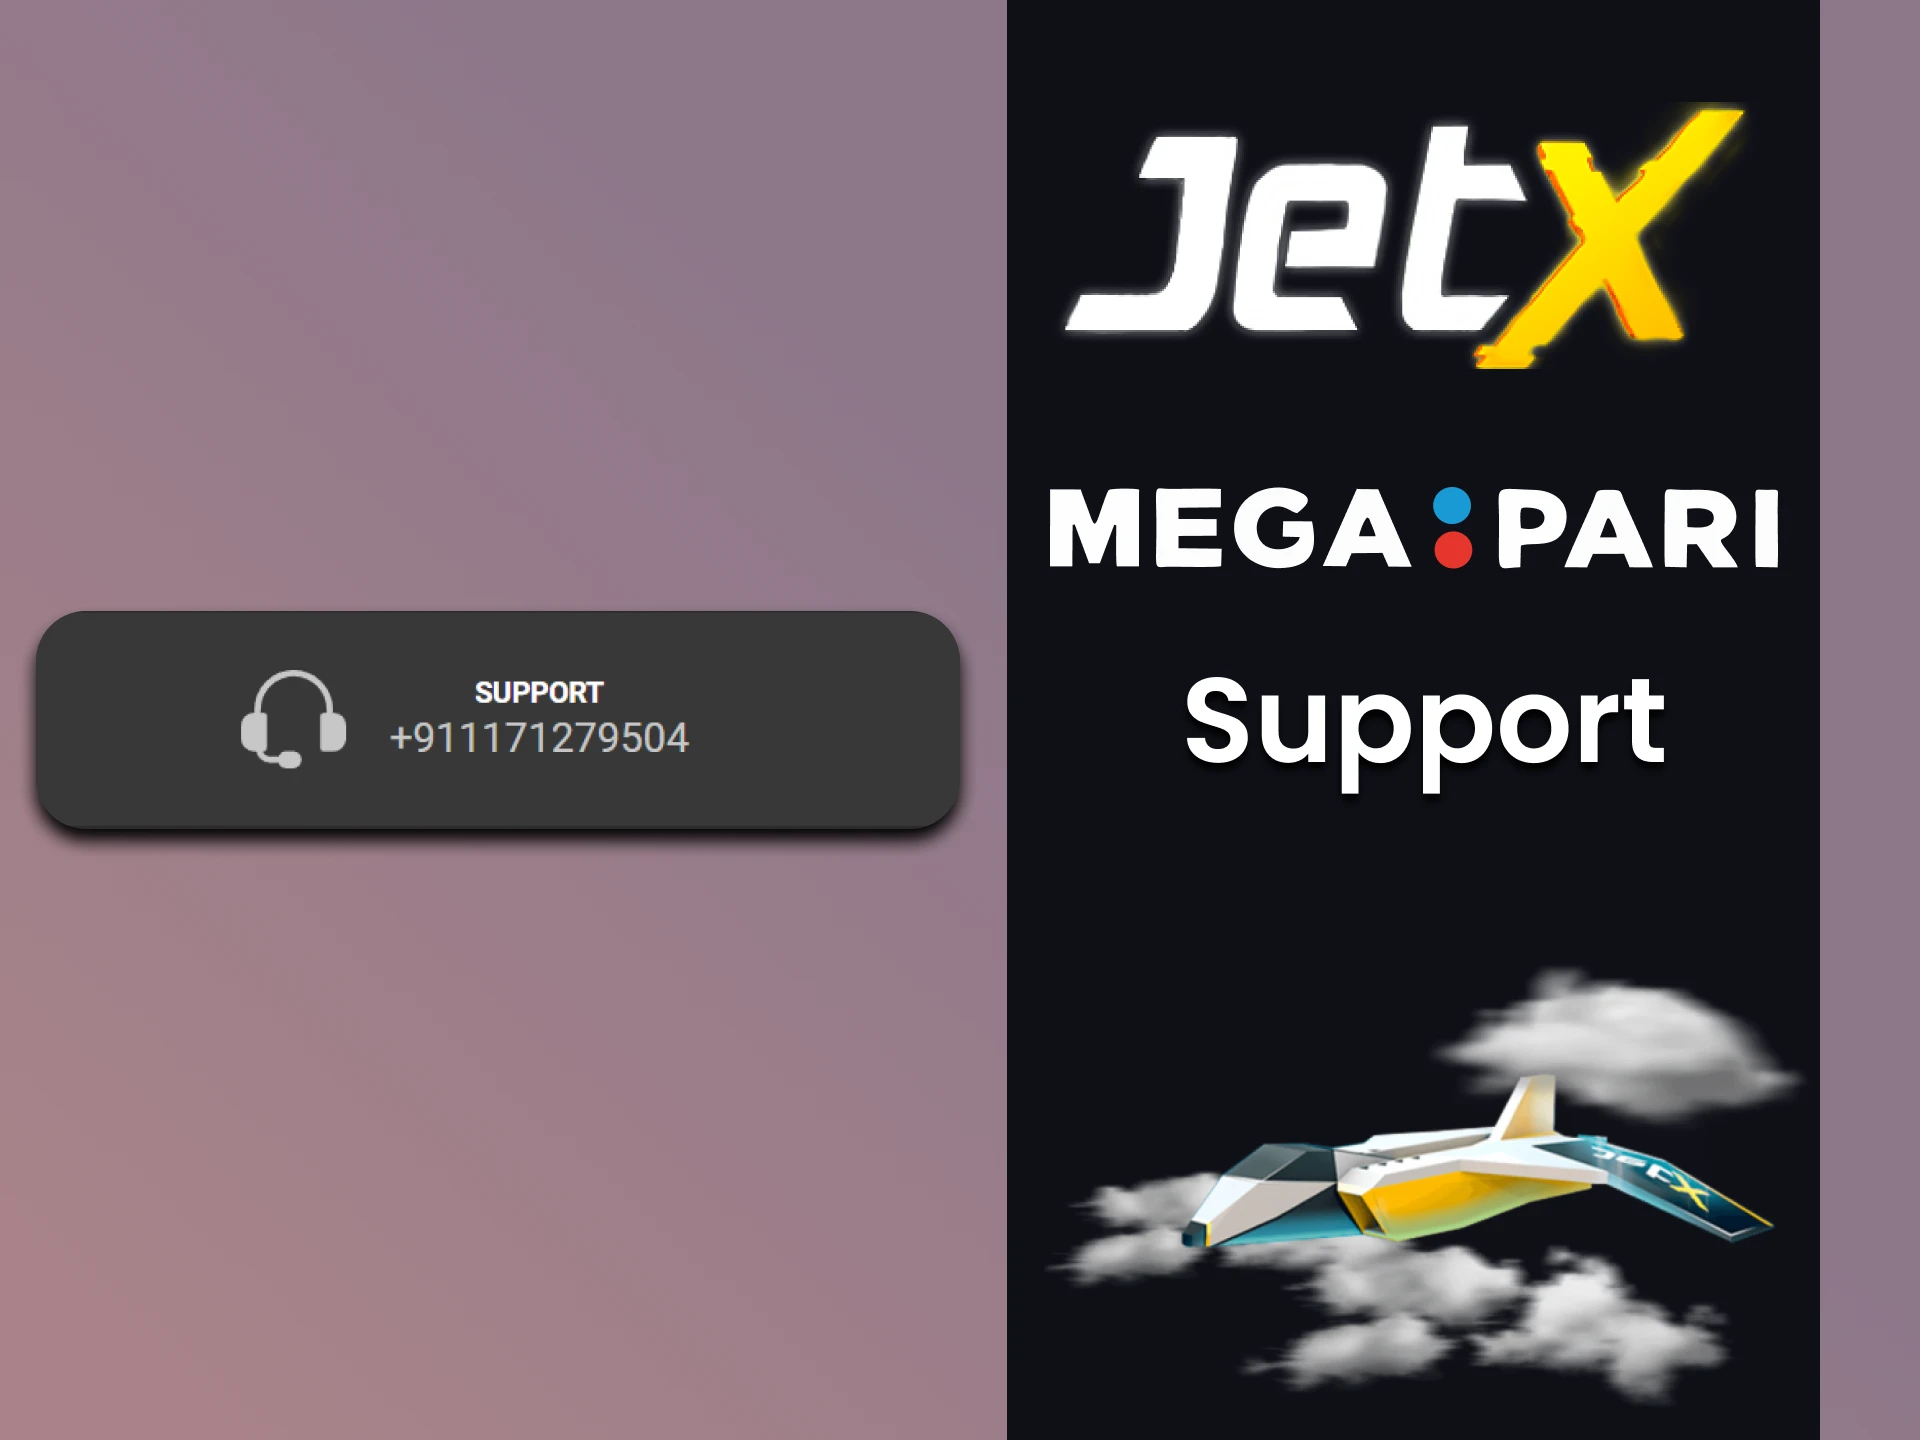 Find out how to contact the Megapari team for the JetX game.